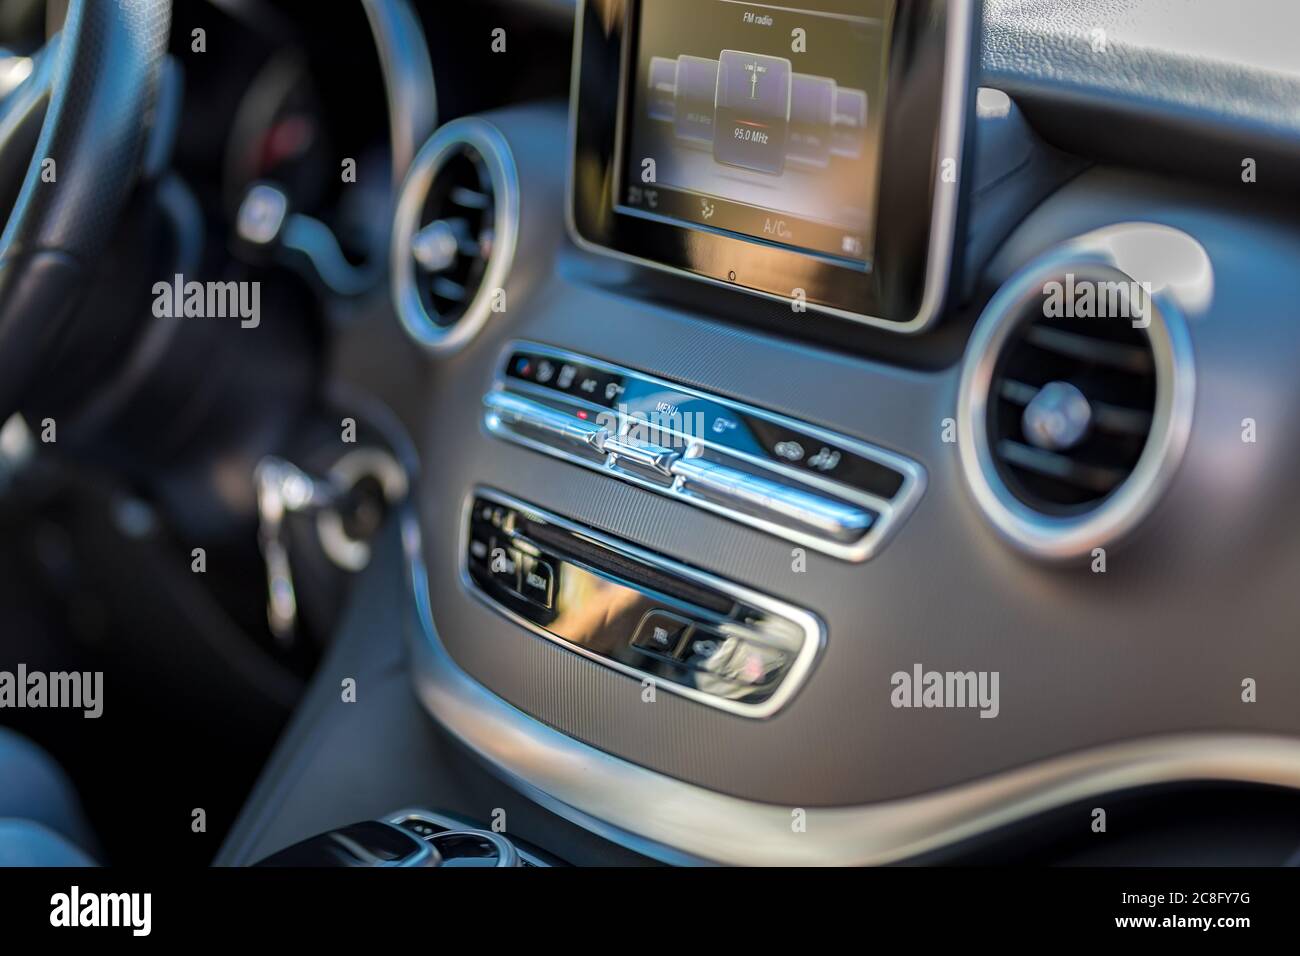 05.07.19 - Austria: Closeup photo of the interior of the brown open-pore ash wood trim on the center console, radio, AC, LCD screen luxury car Stock Photo